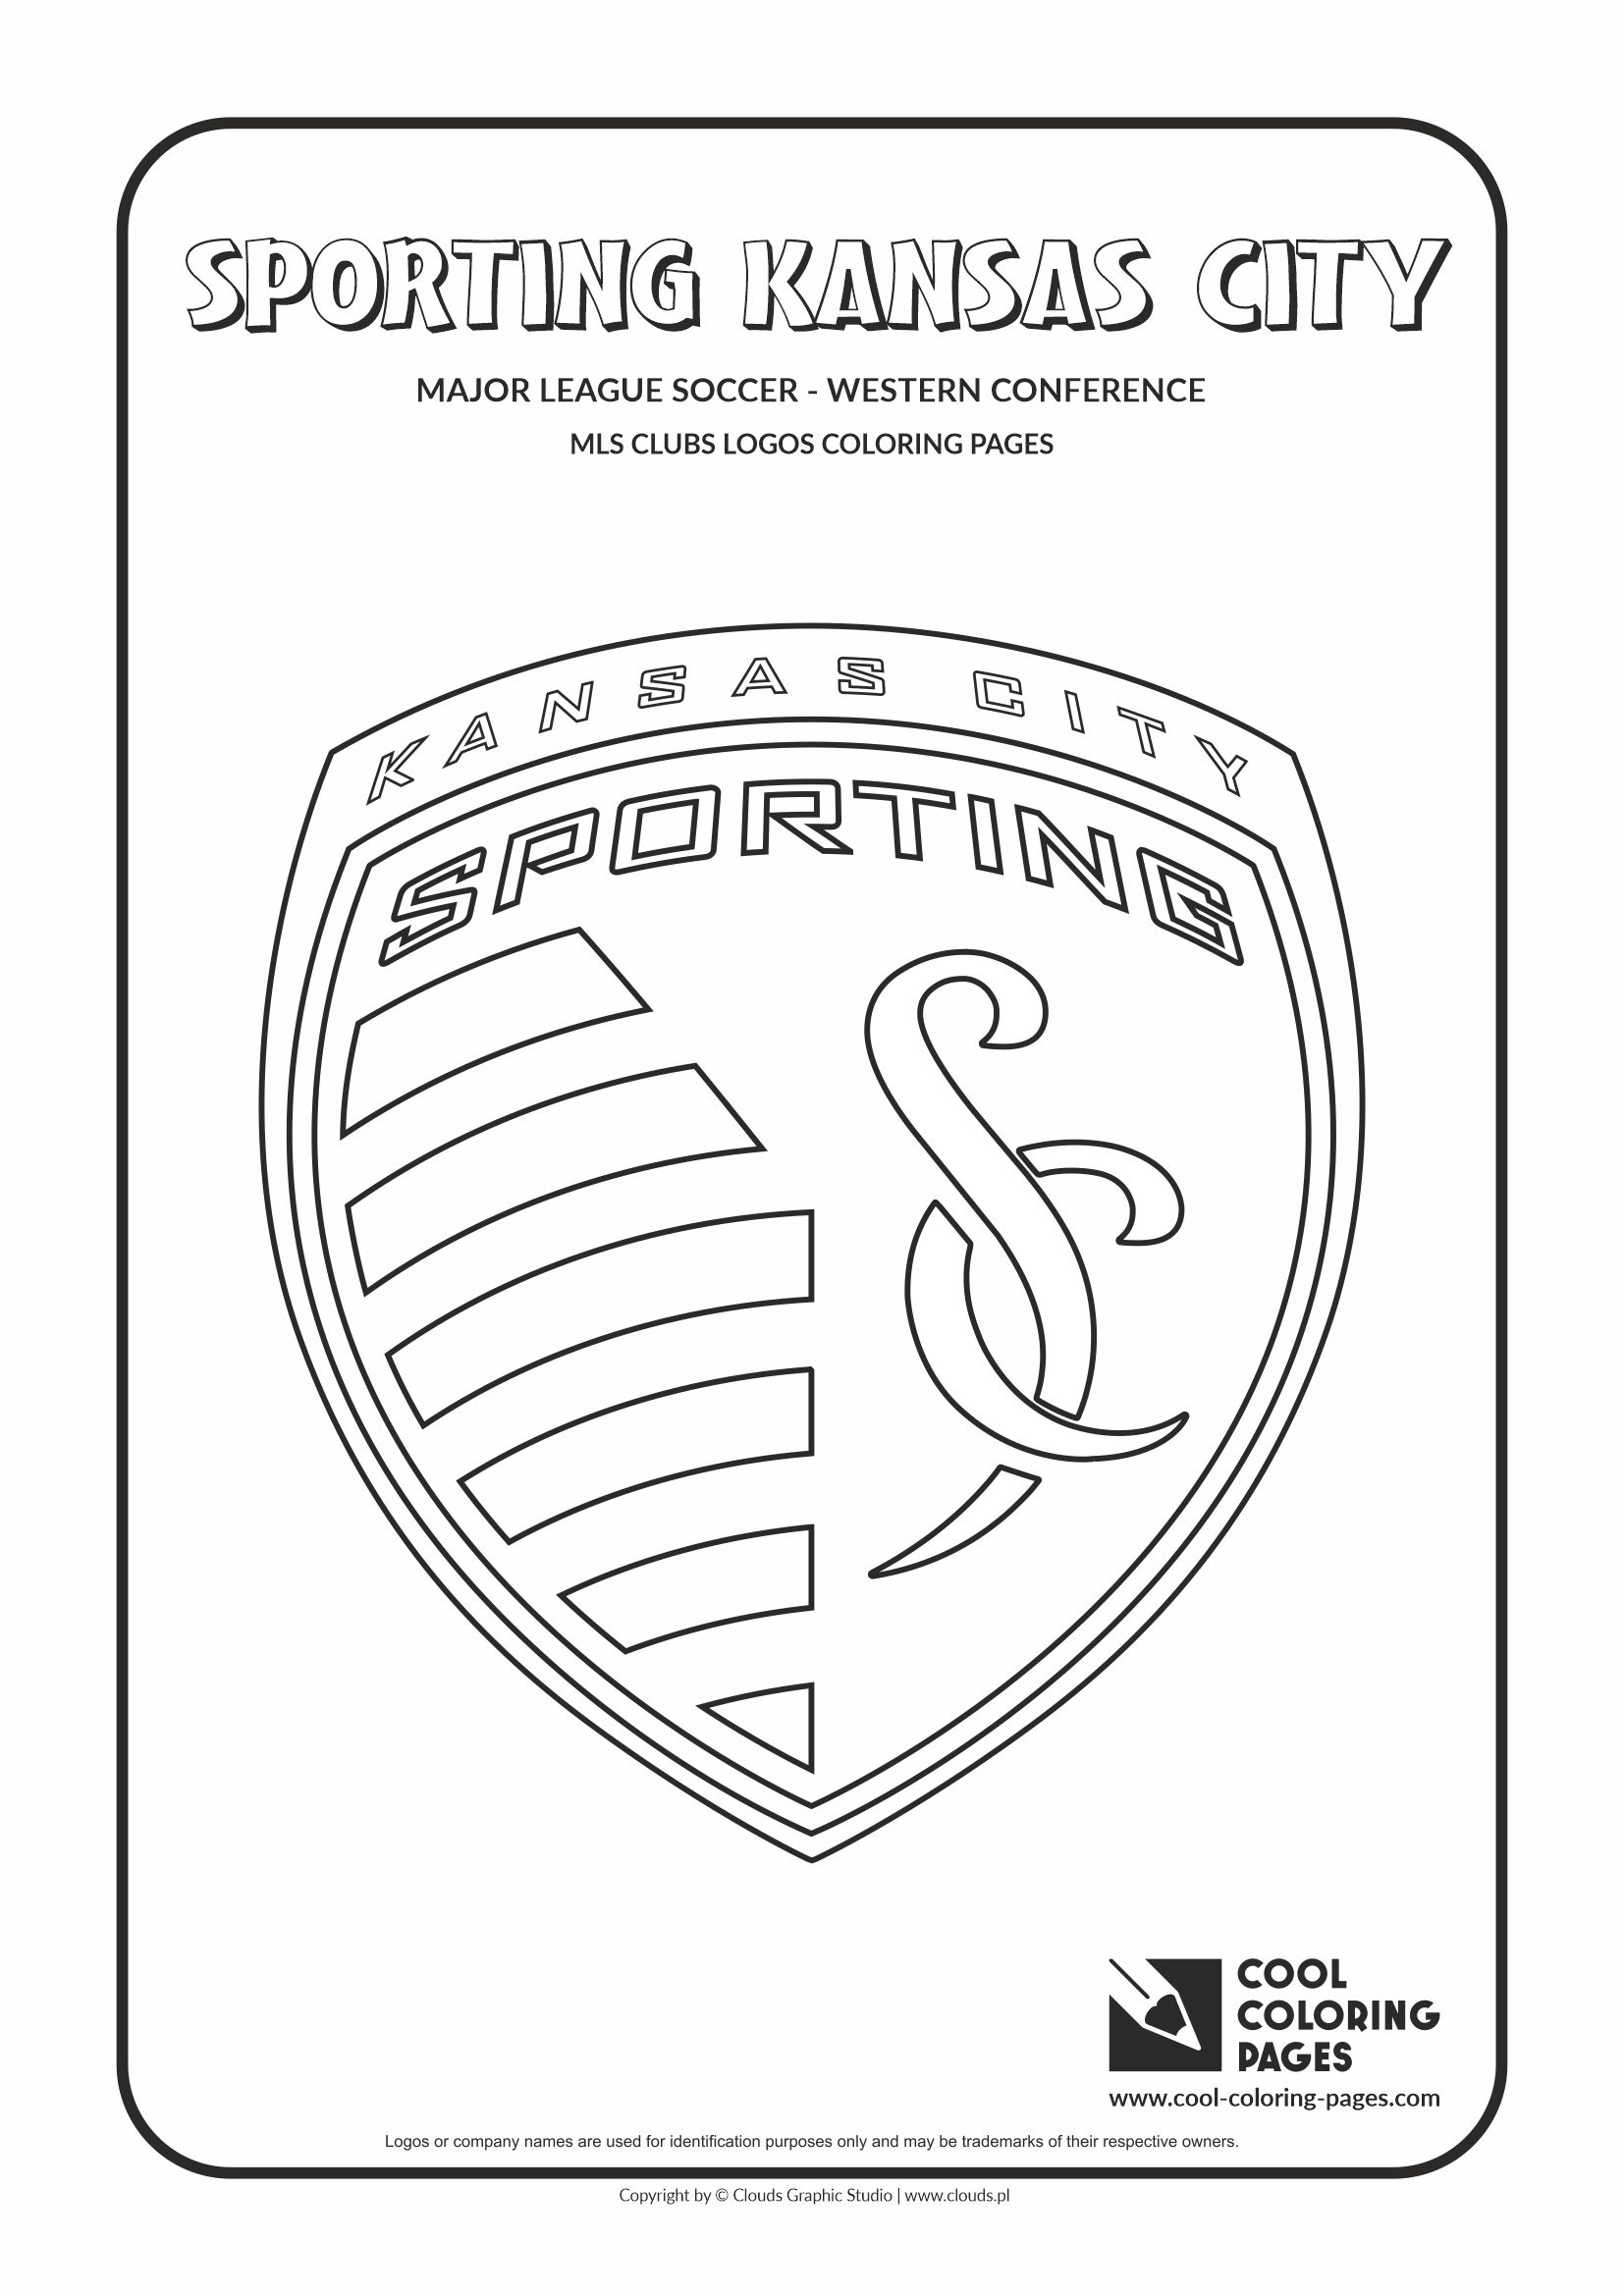 Cool Coloring Pages – MLS clubs logos - Sporting Kansas City